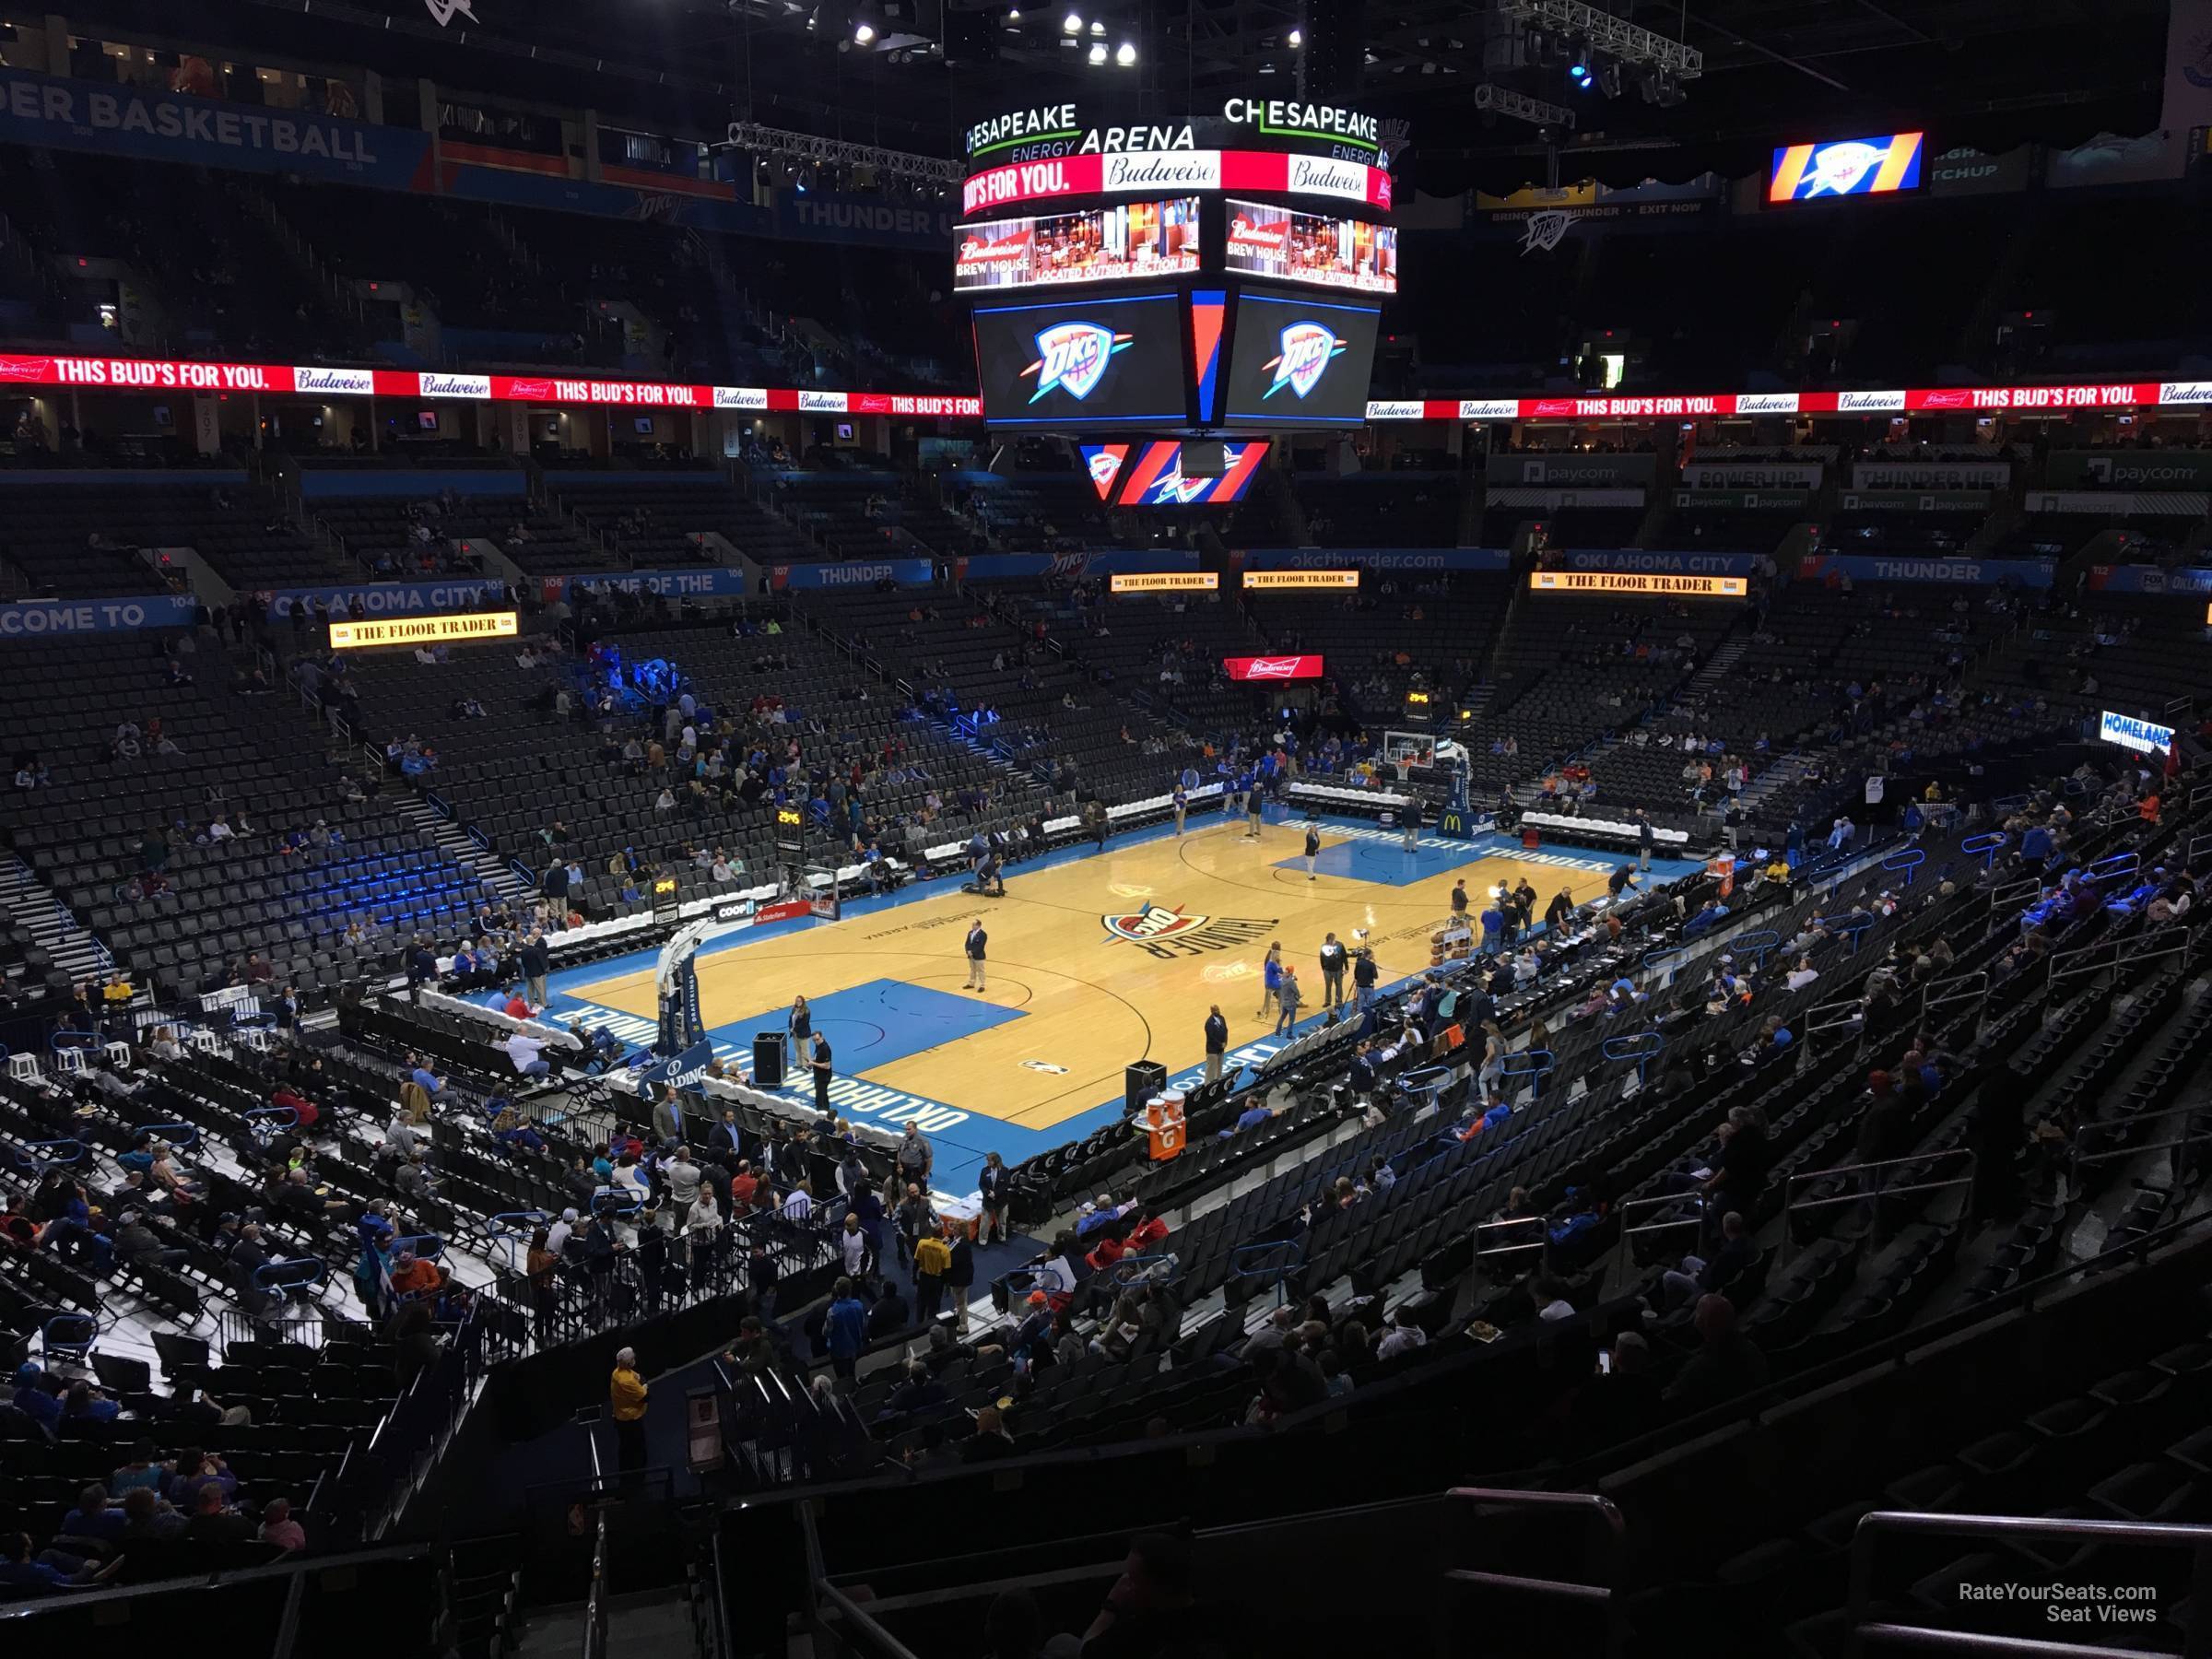 section 227, row h seat view  for basketball - paycom center